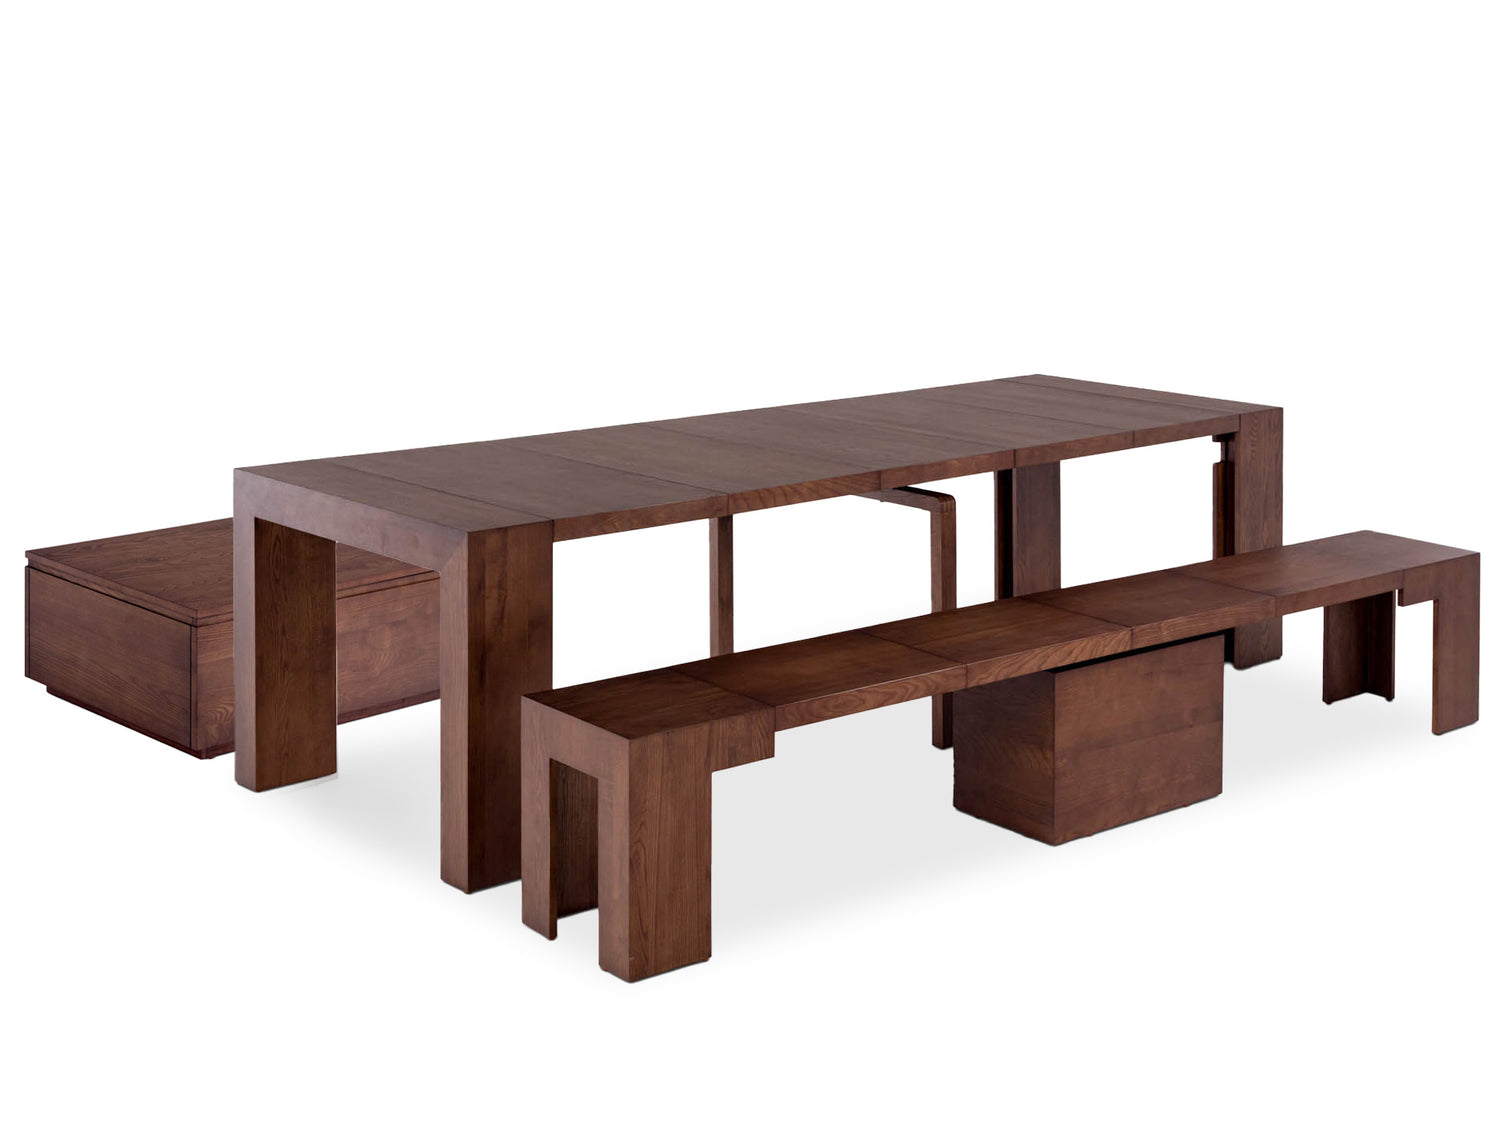 Brazilian Sequoia ::Gallery::Expanded Brazilian Sequoia Transformer Table Shown with Bench